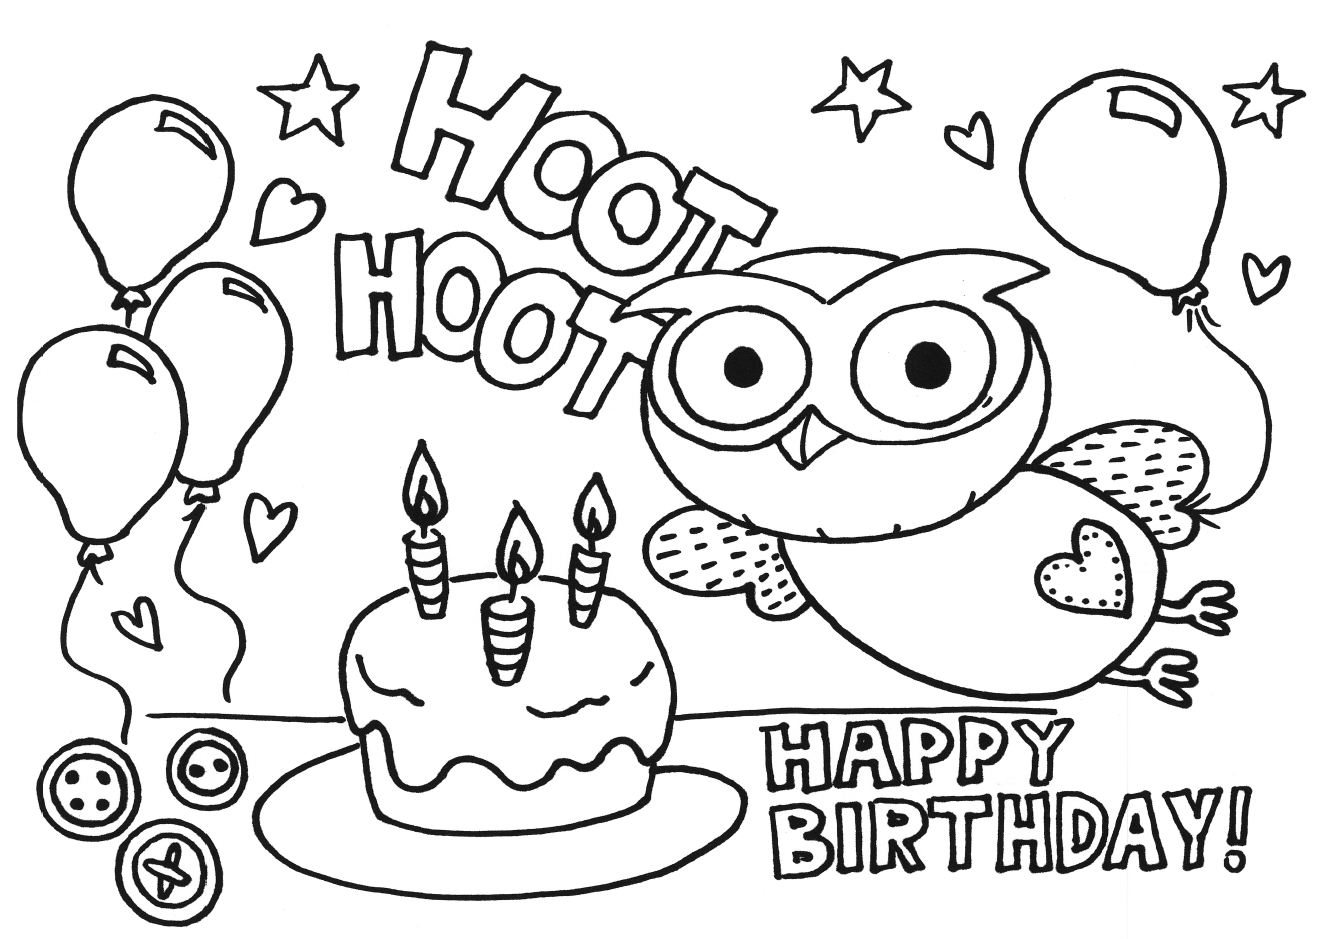 dinosaur-birthday-coloring-pages-at-getcolorings-free-printable